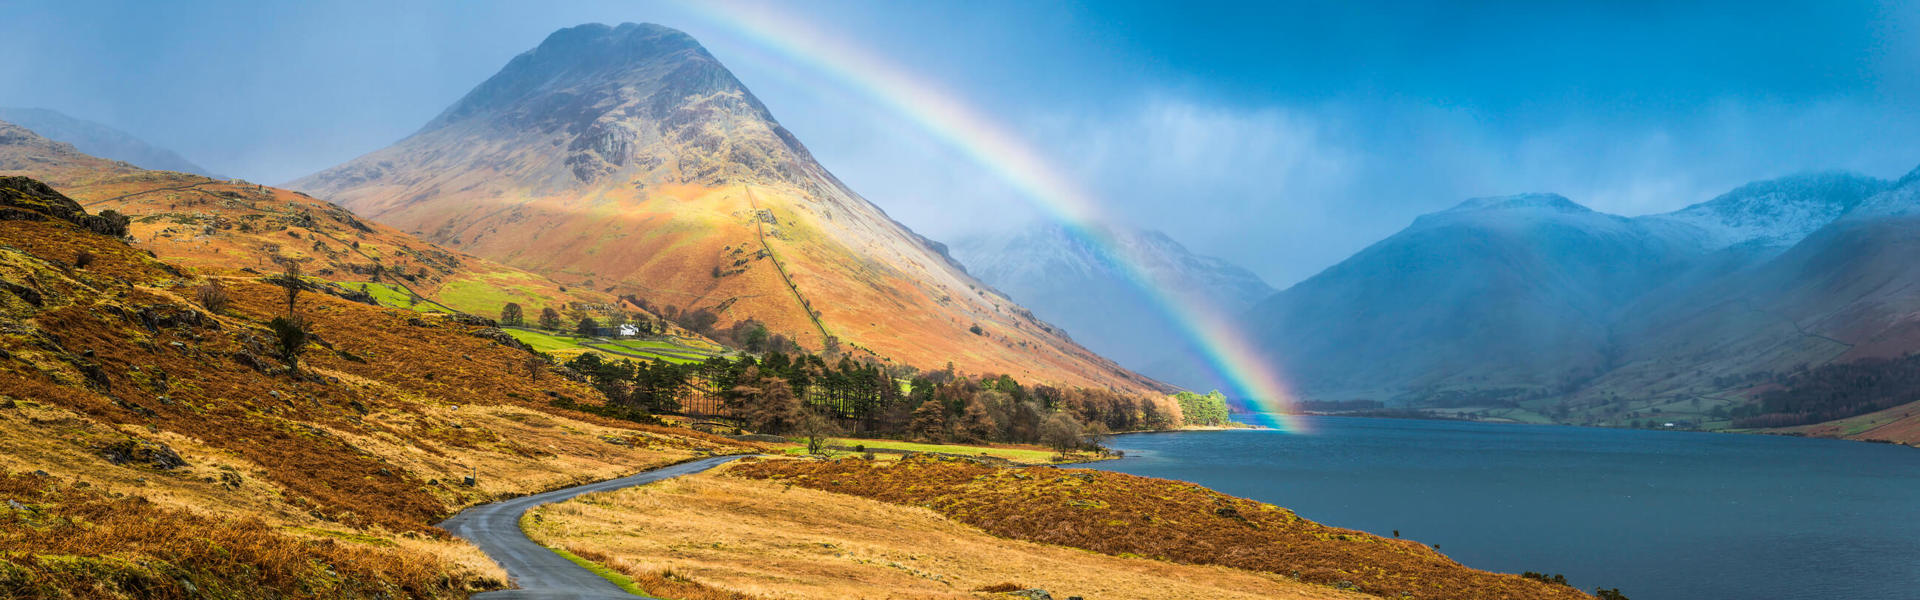 Lake District rainbow over Wast Water Western Fells panorama Cumbria